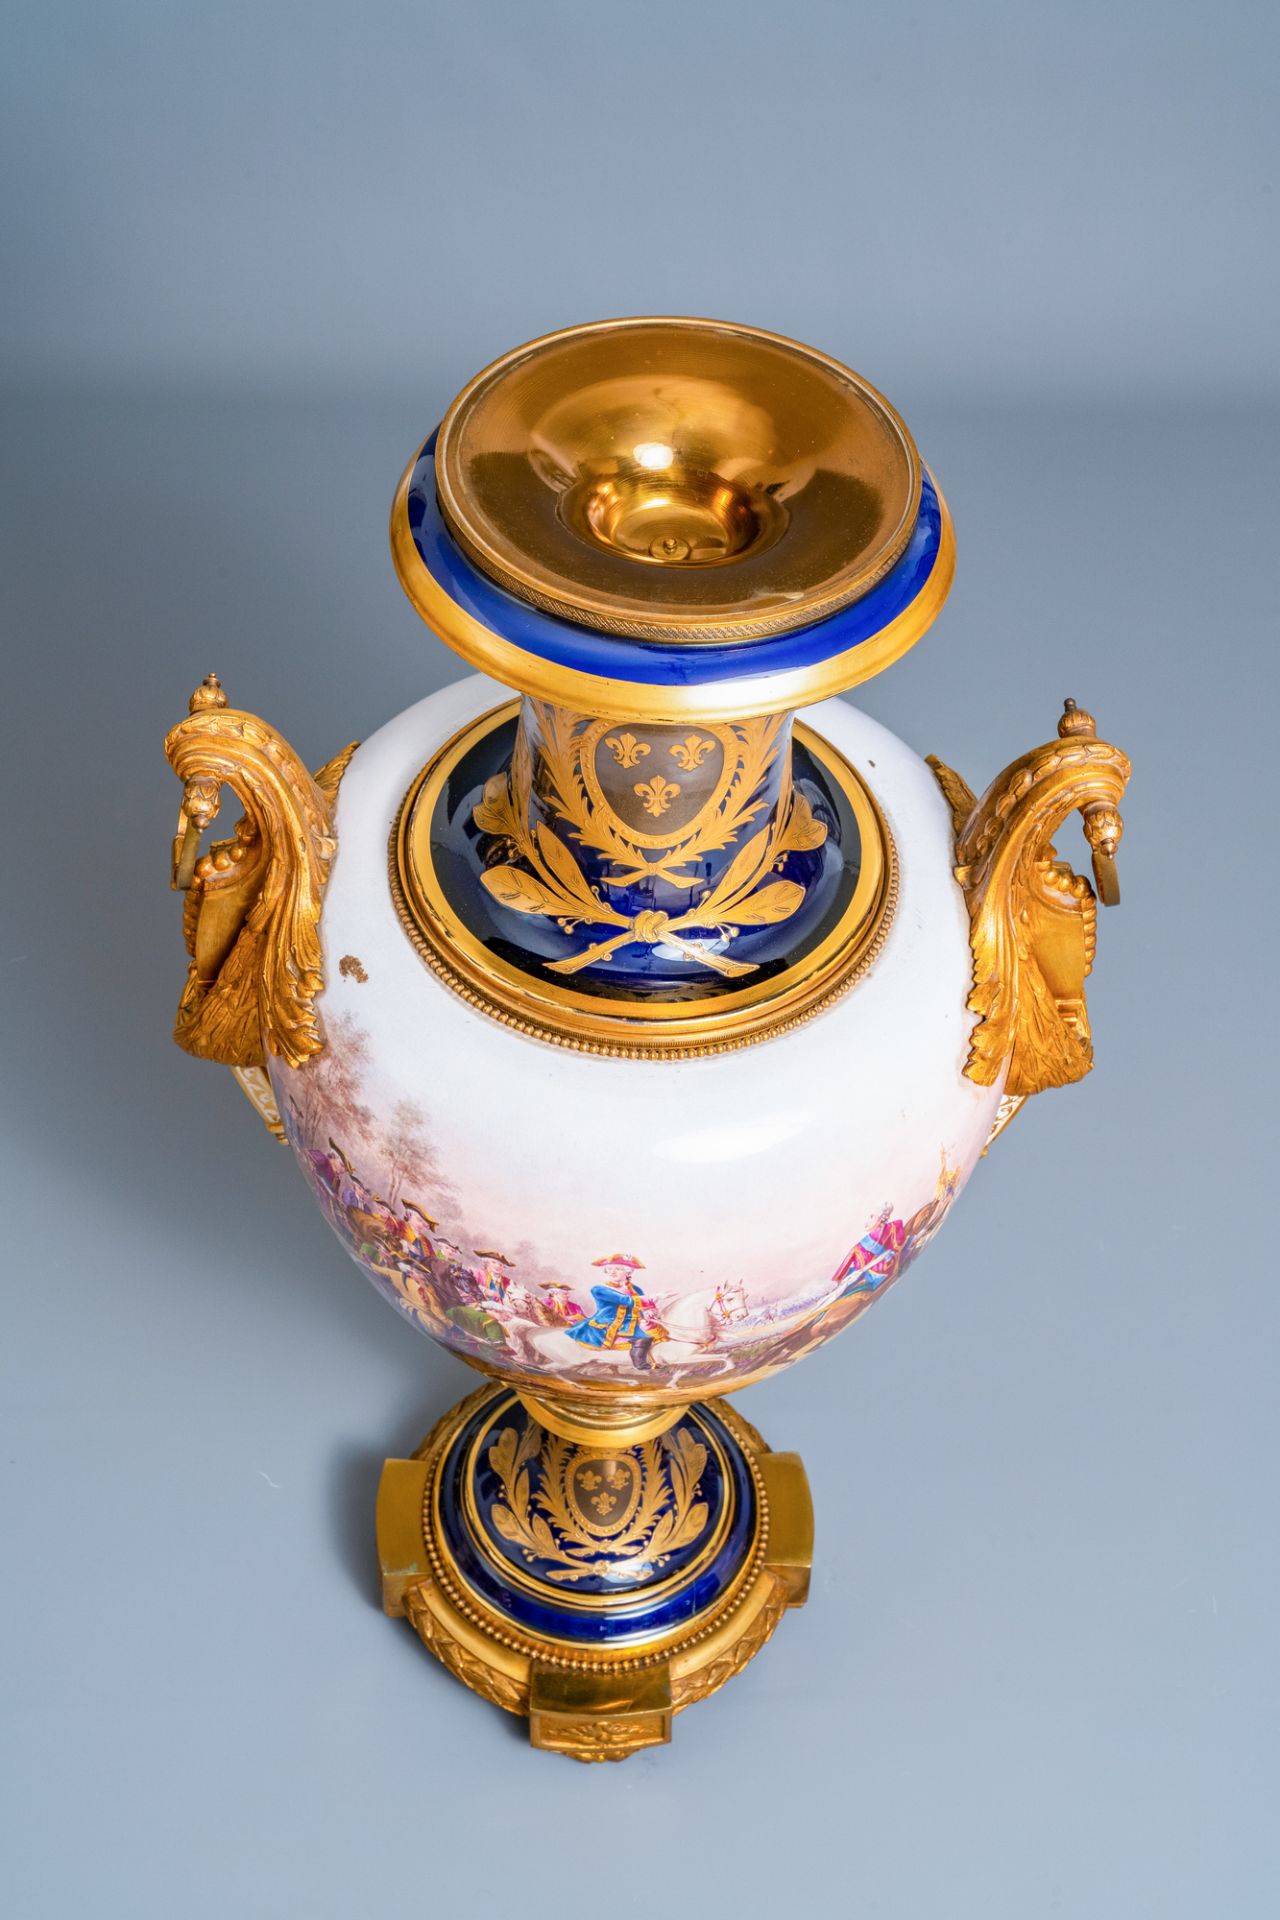 A pair of massive French Svres-style vases with gilded bronze mounts, signed Desprez, 19th C. - Image 12 of 56